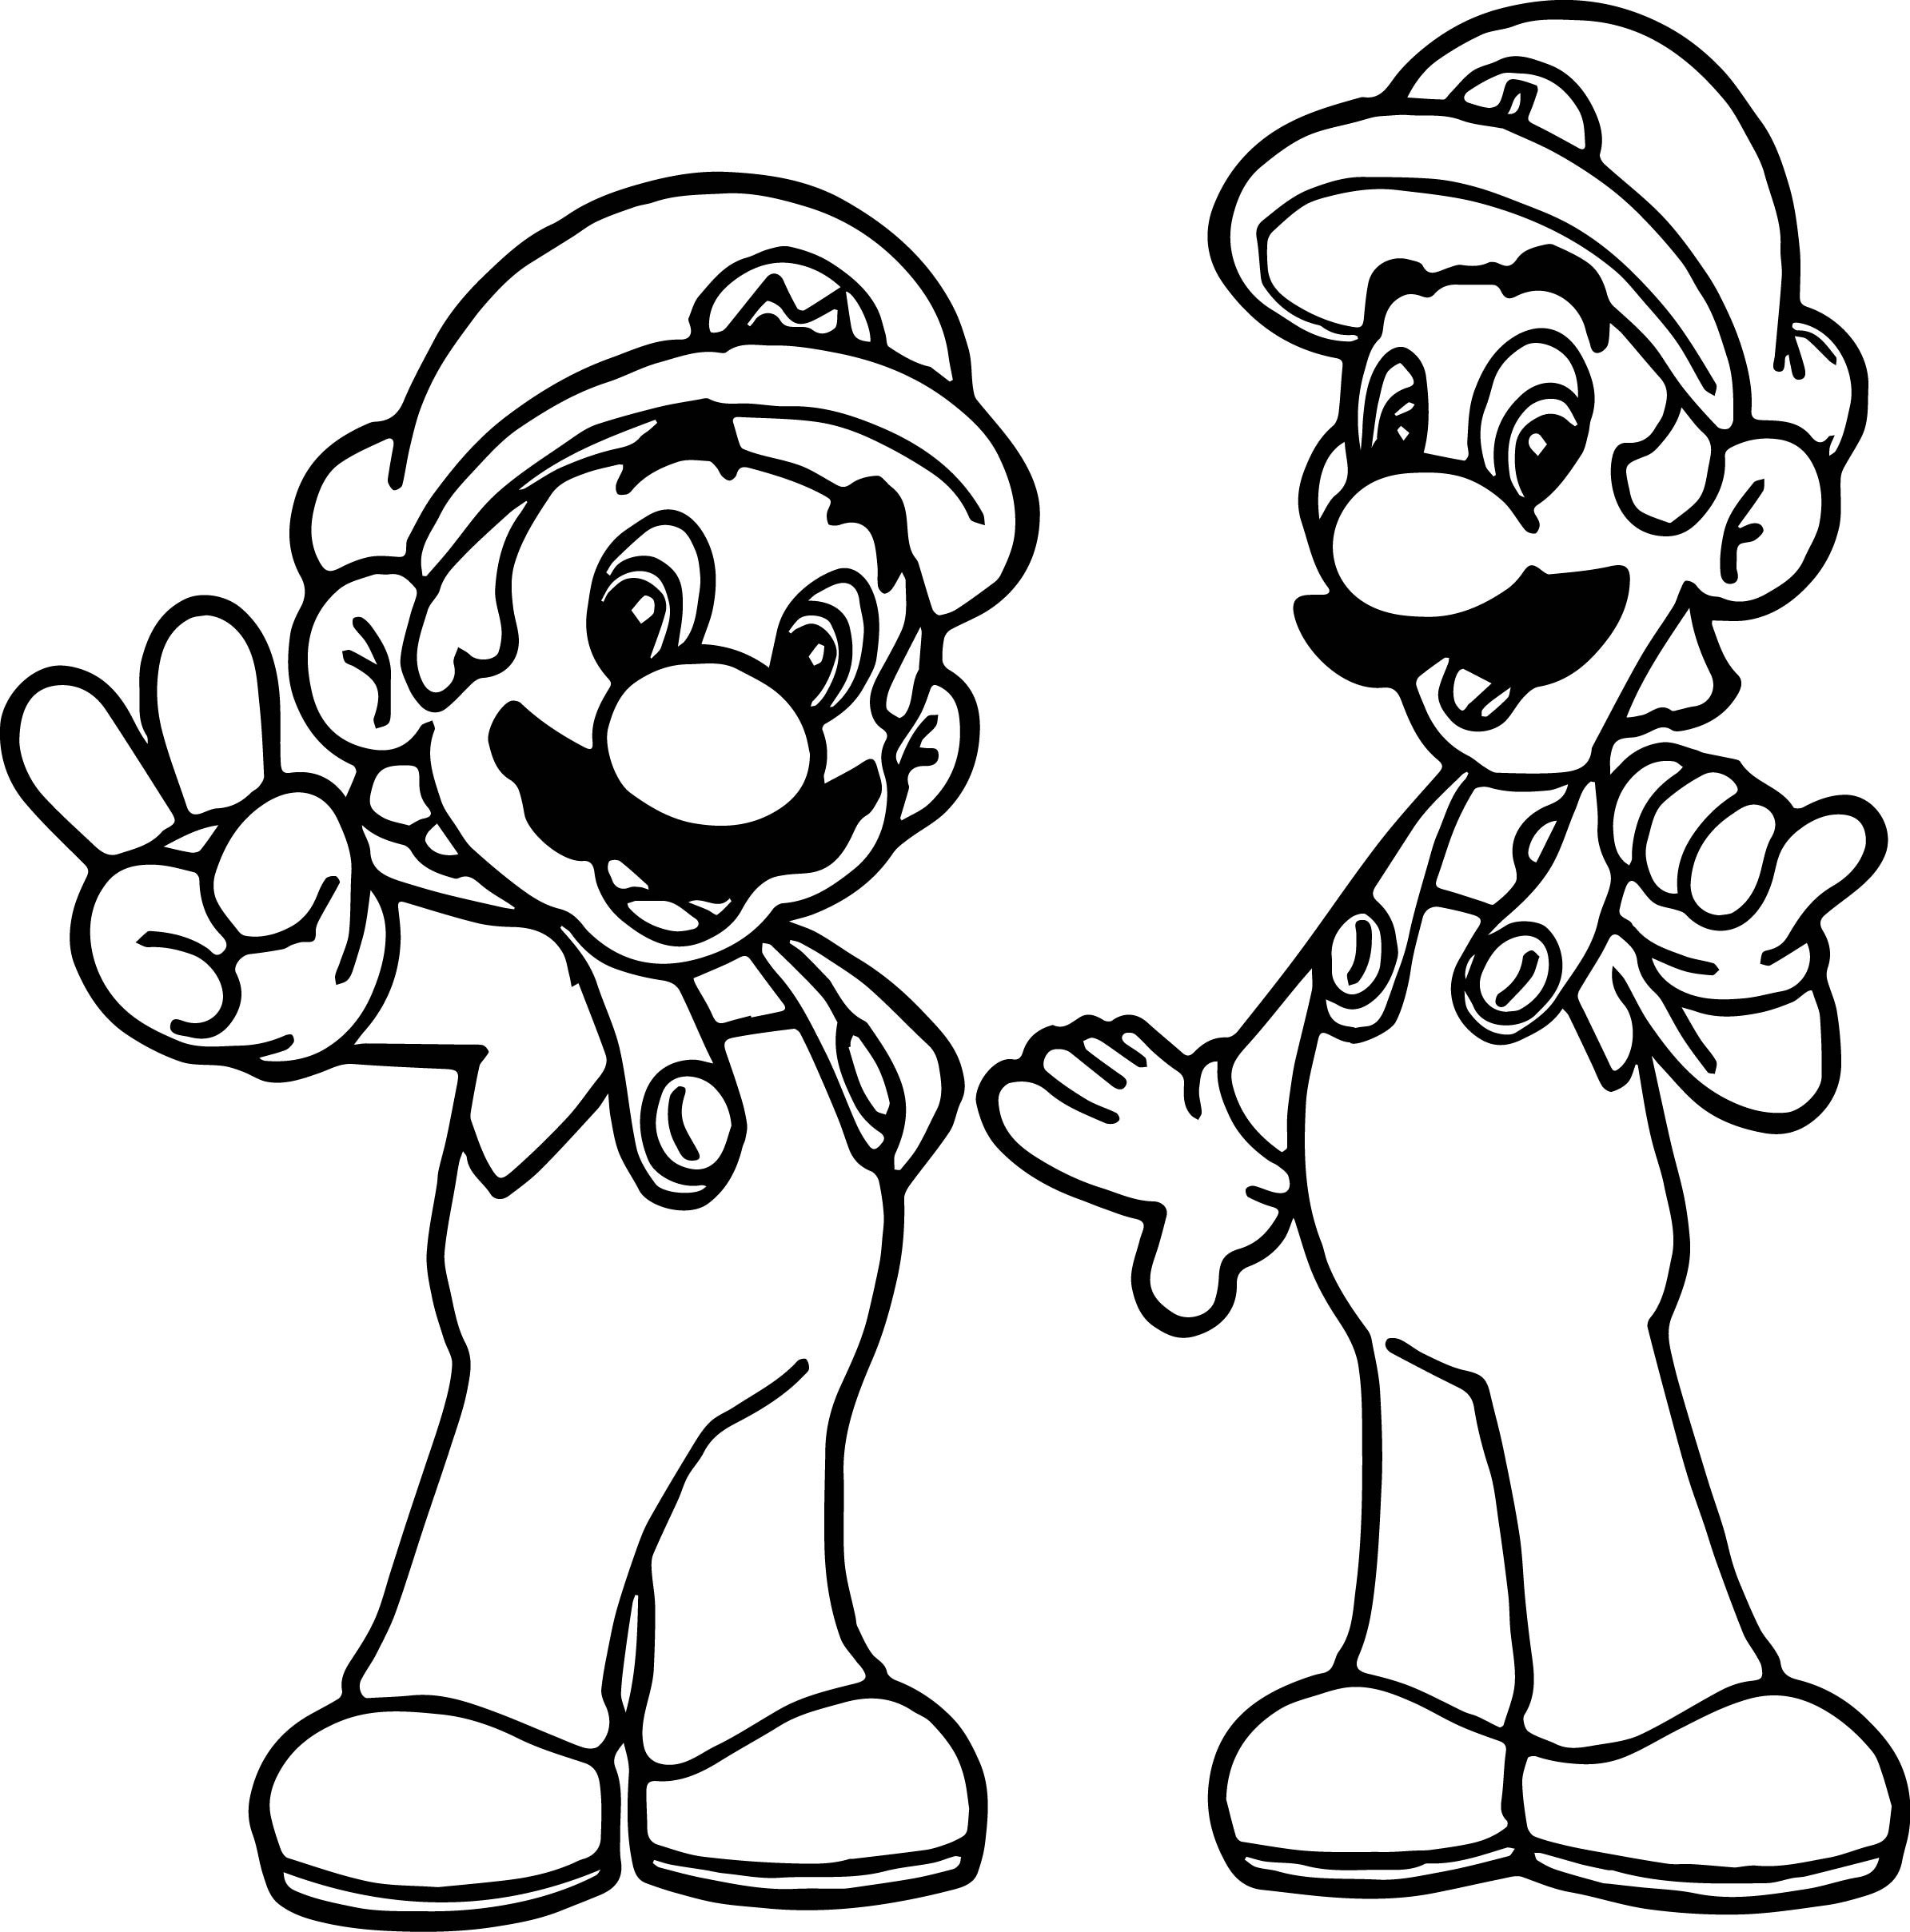 Mario And Luigi Coloring Pages at GetDrawings | Free download